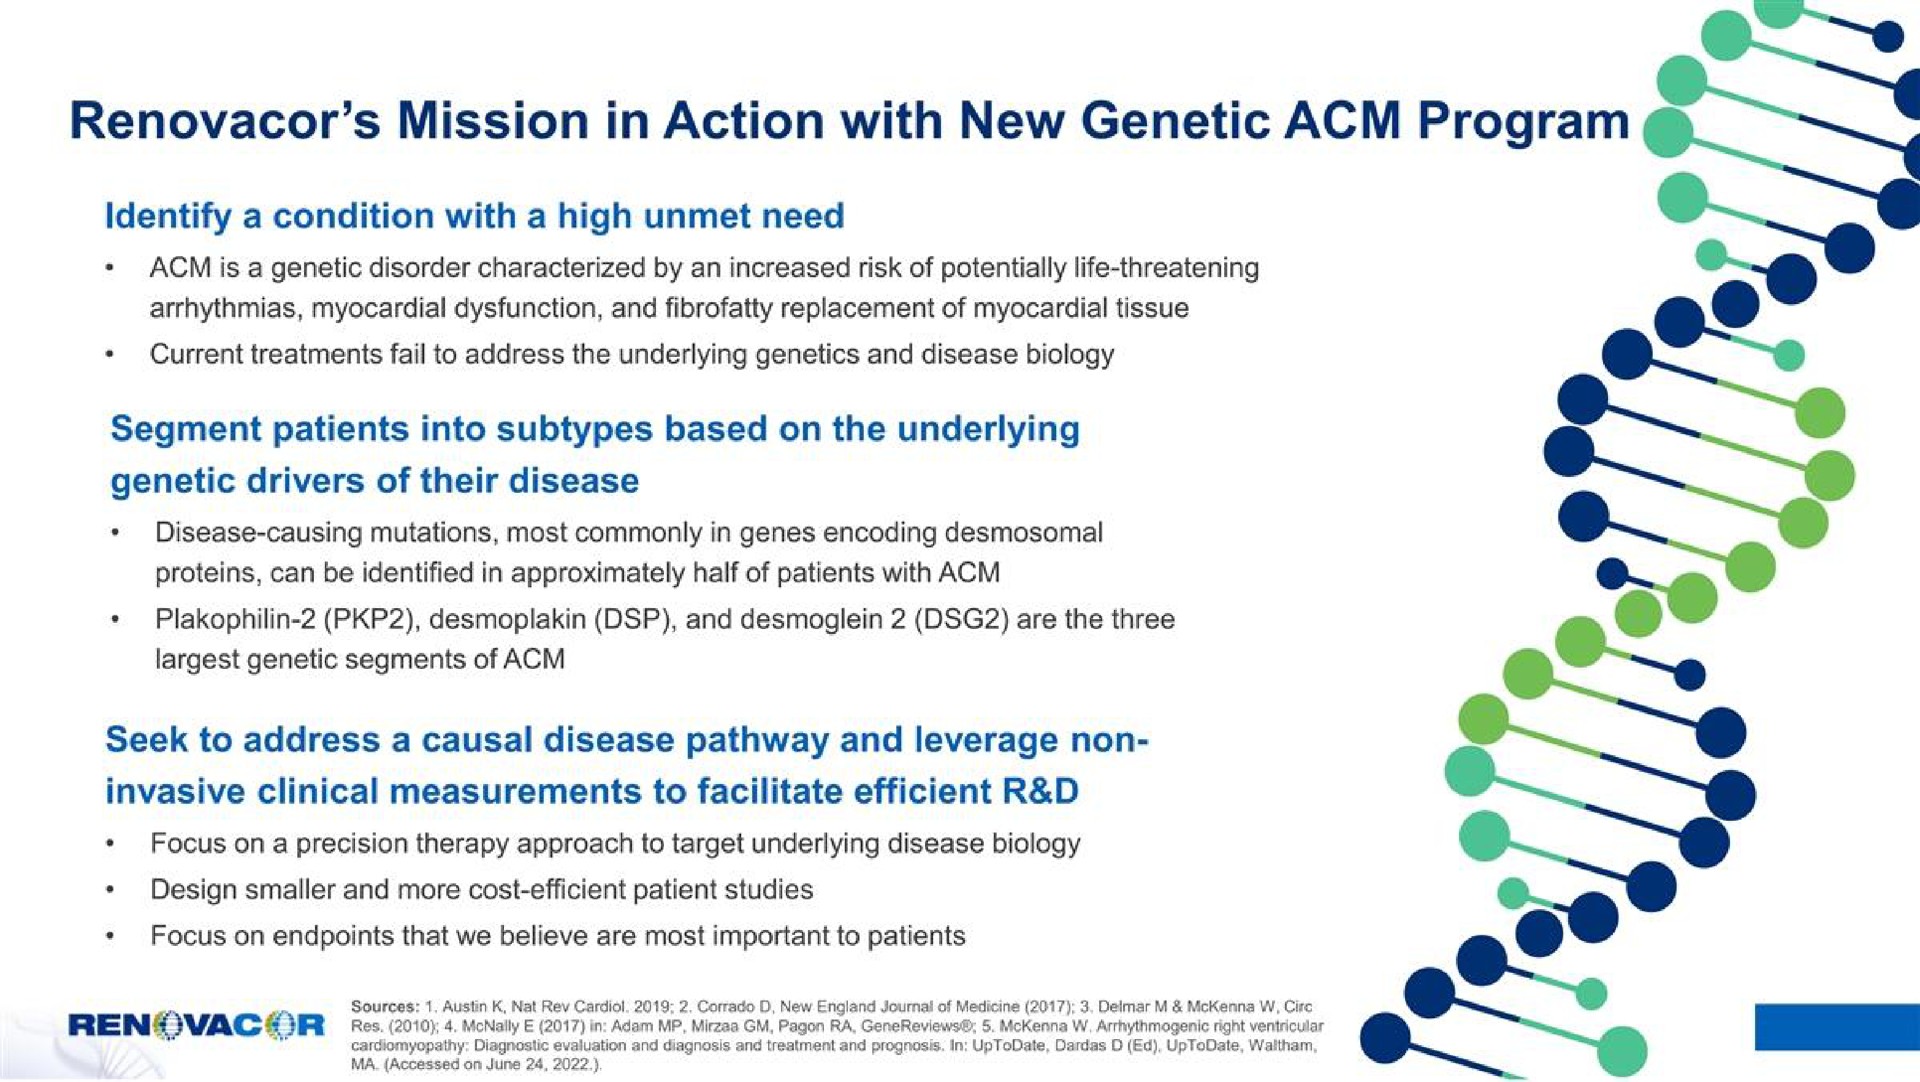 mission in action with new genetic program | Renovacor